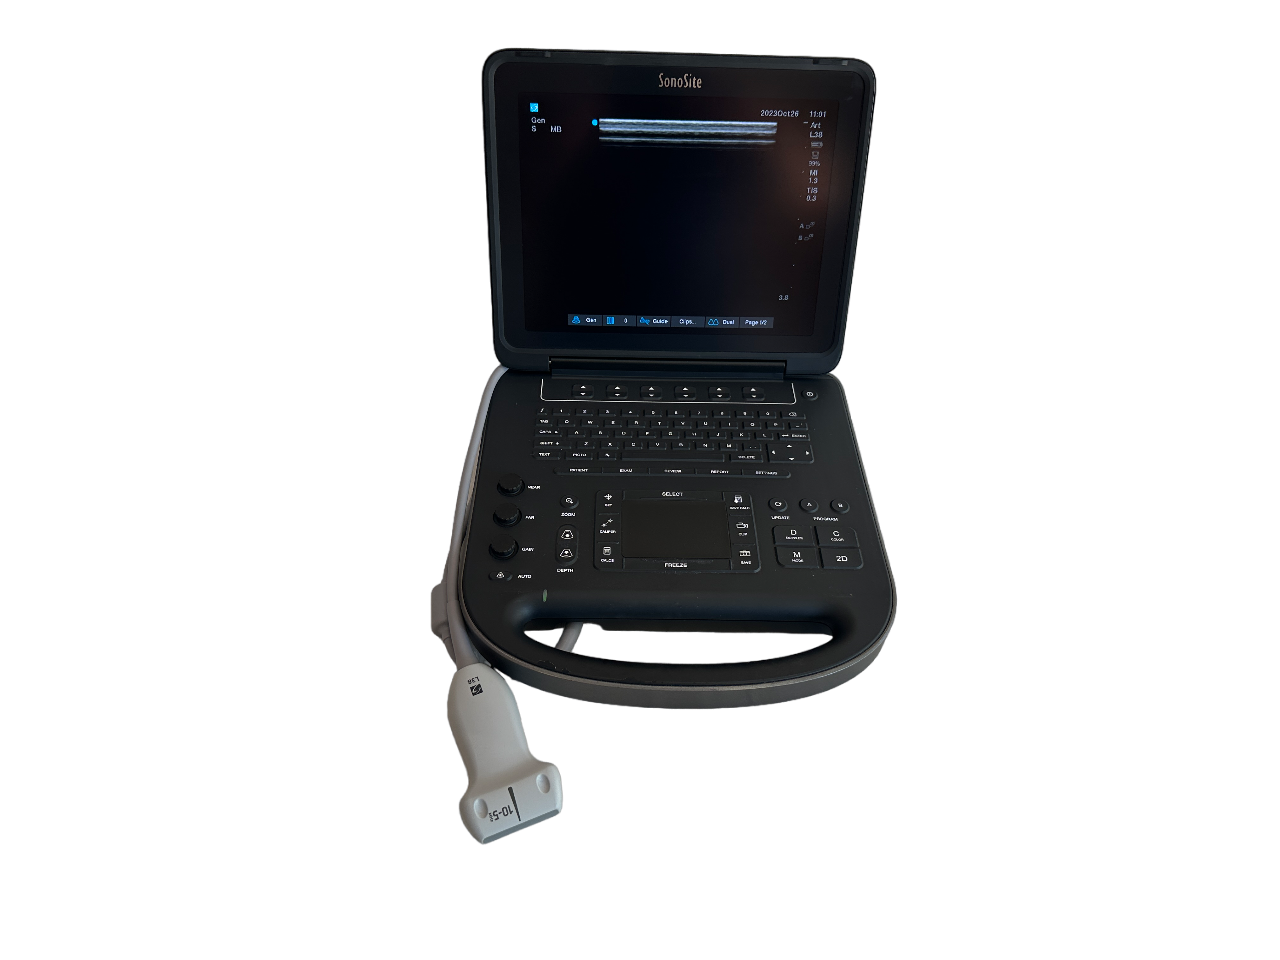 Sonosite Edge II Ultrasound 2017/Color, DICOM, with Two Probes L38xi & rC60Xi DIAGNOSTIC ULTRASOUND MACHINES FOR SALE